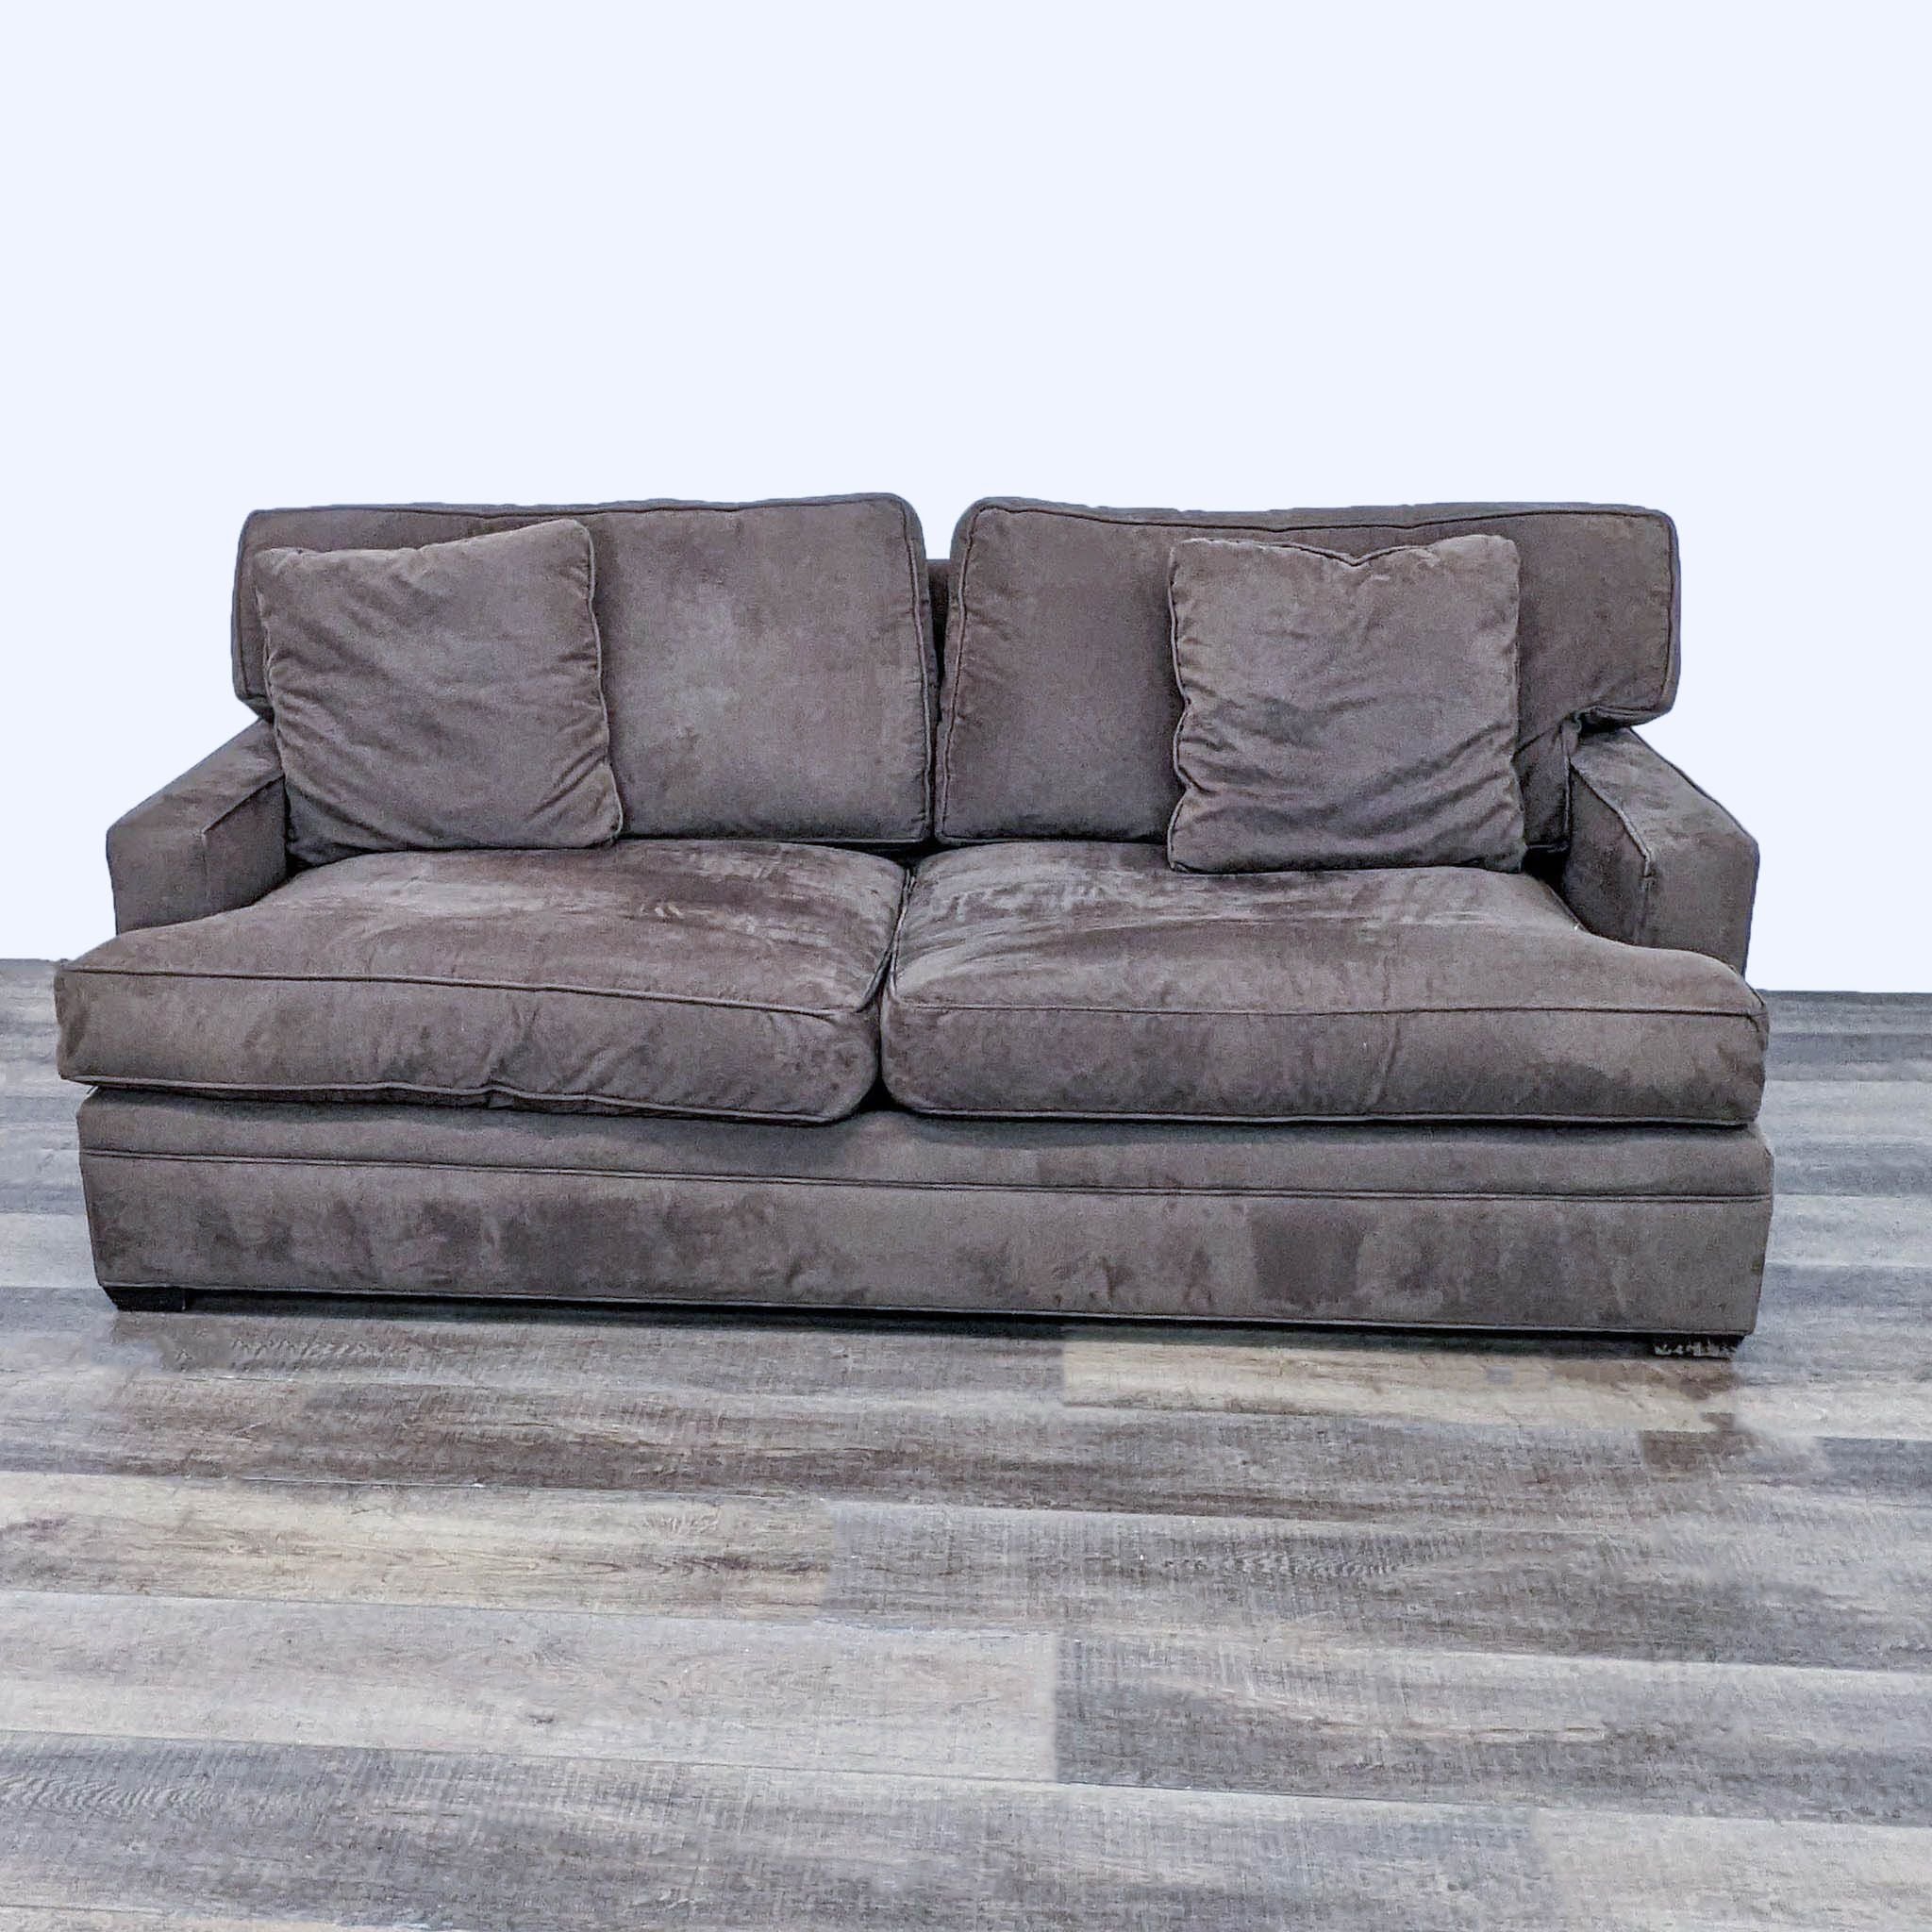 Crate & Barrel brown sleeper sofa with plush cushions and narrow arms, set on a wood-look floor.